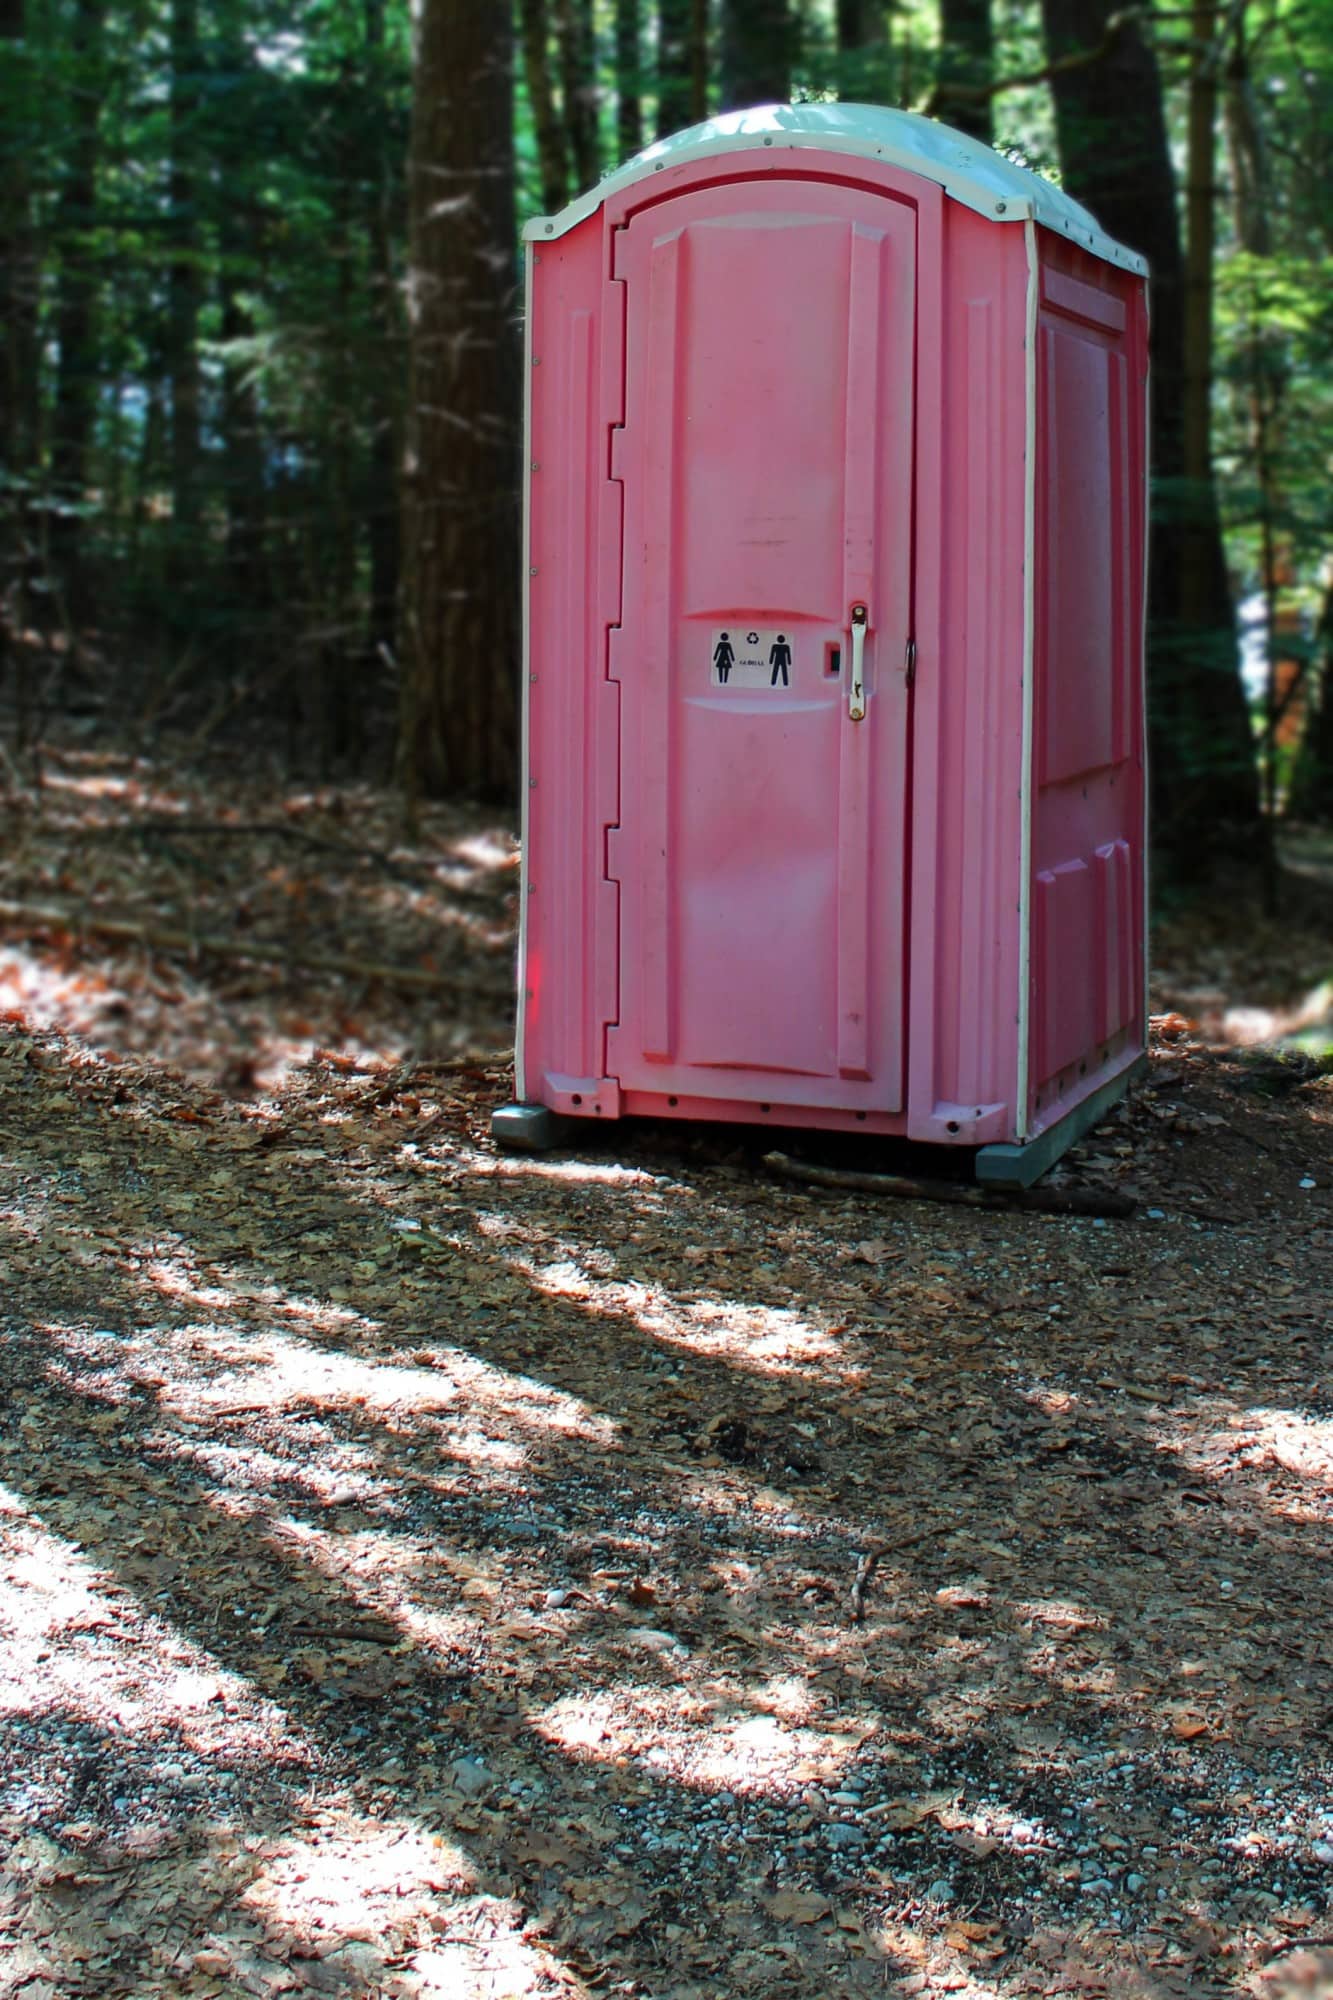 renting a porta john for an event